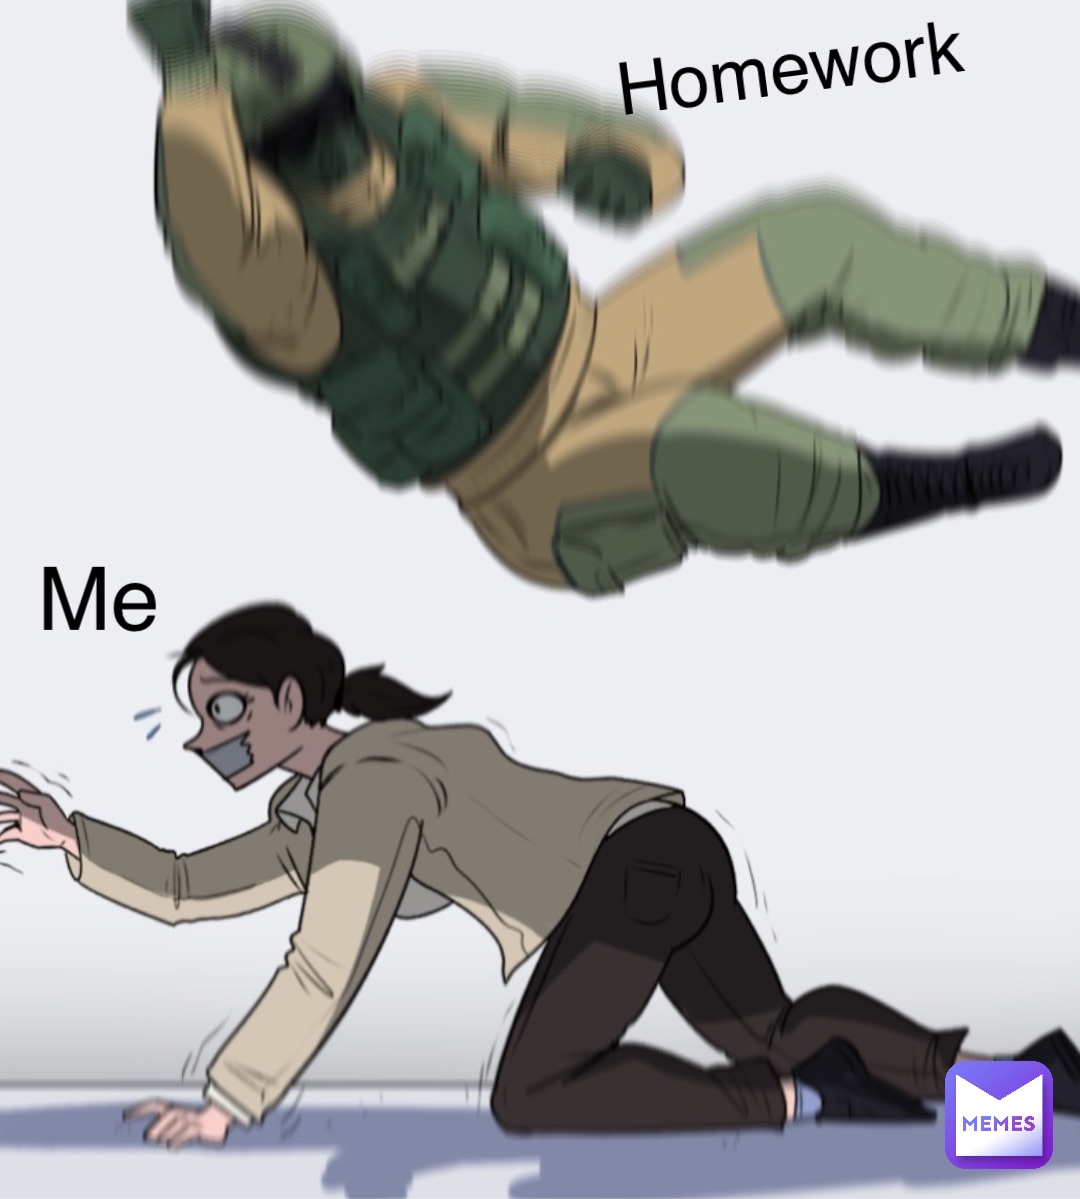 Double tap to edit Homework Me